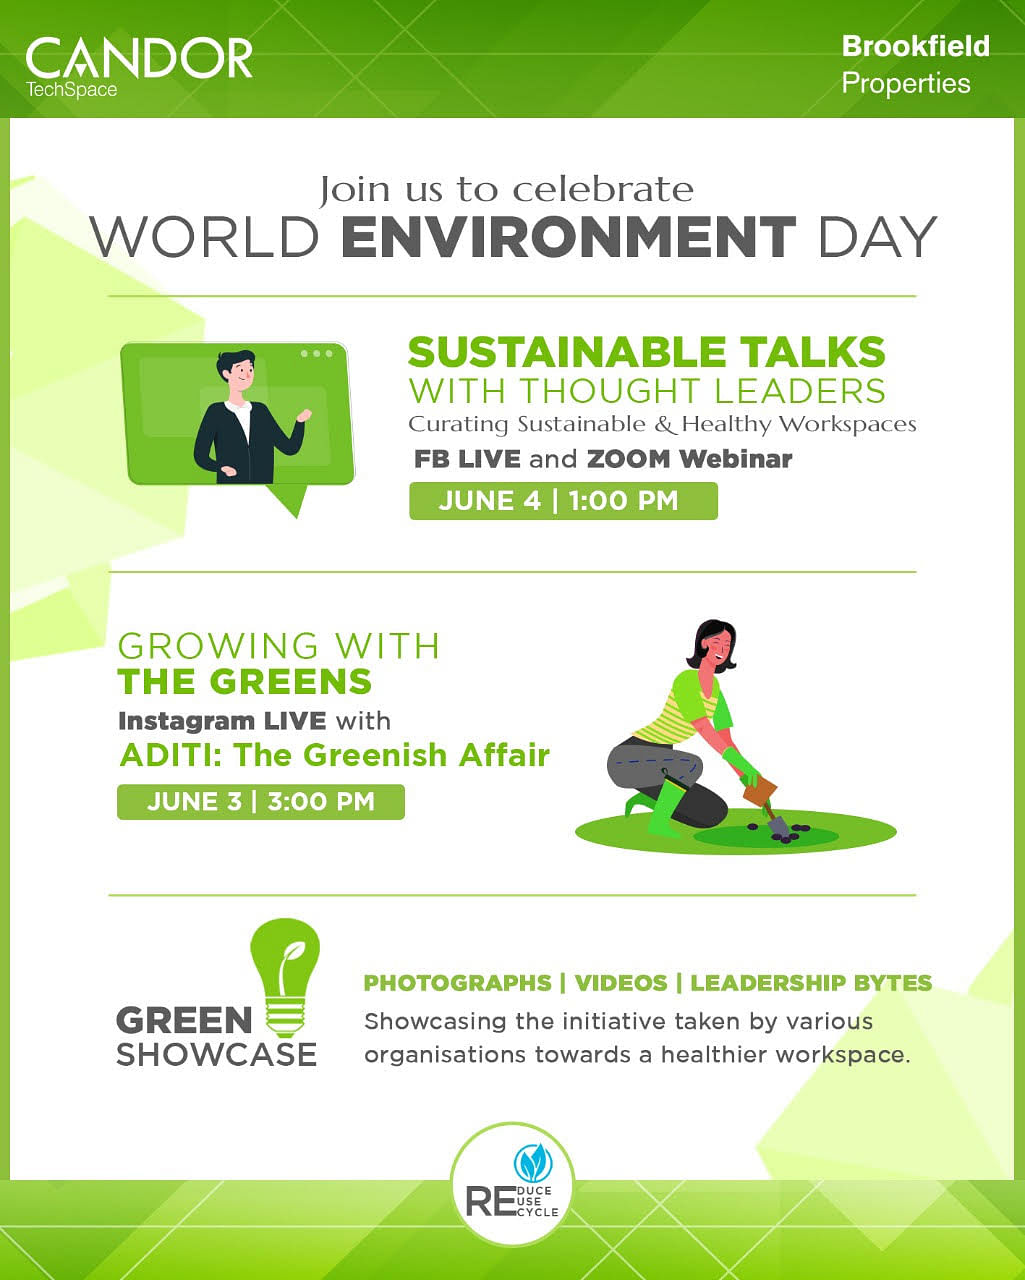 World Environment Day 2020 campaigns take the onus of spreading awareness